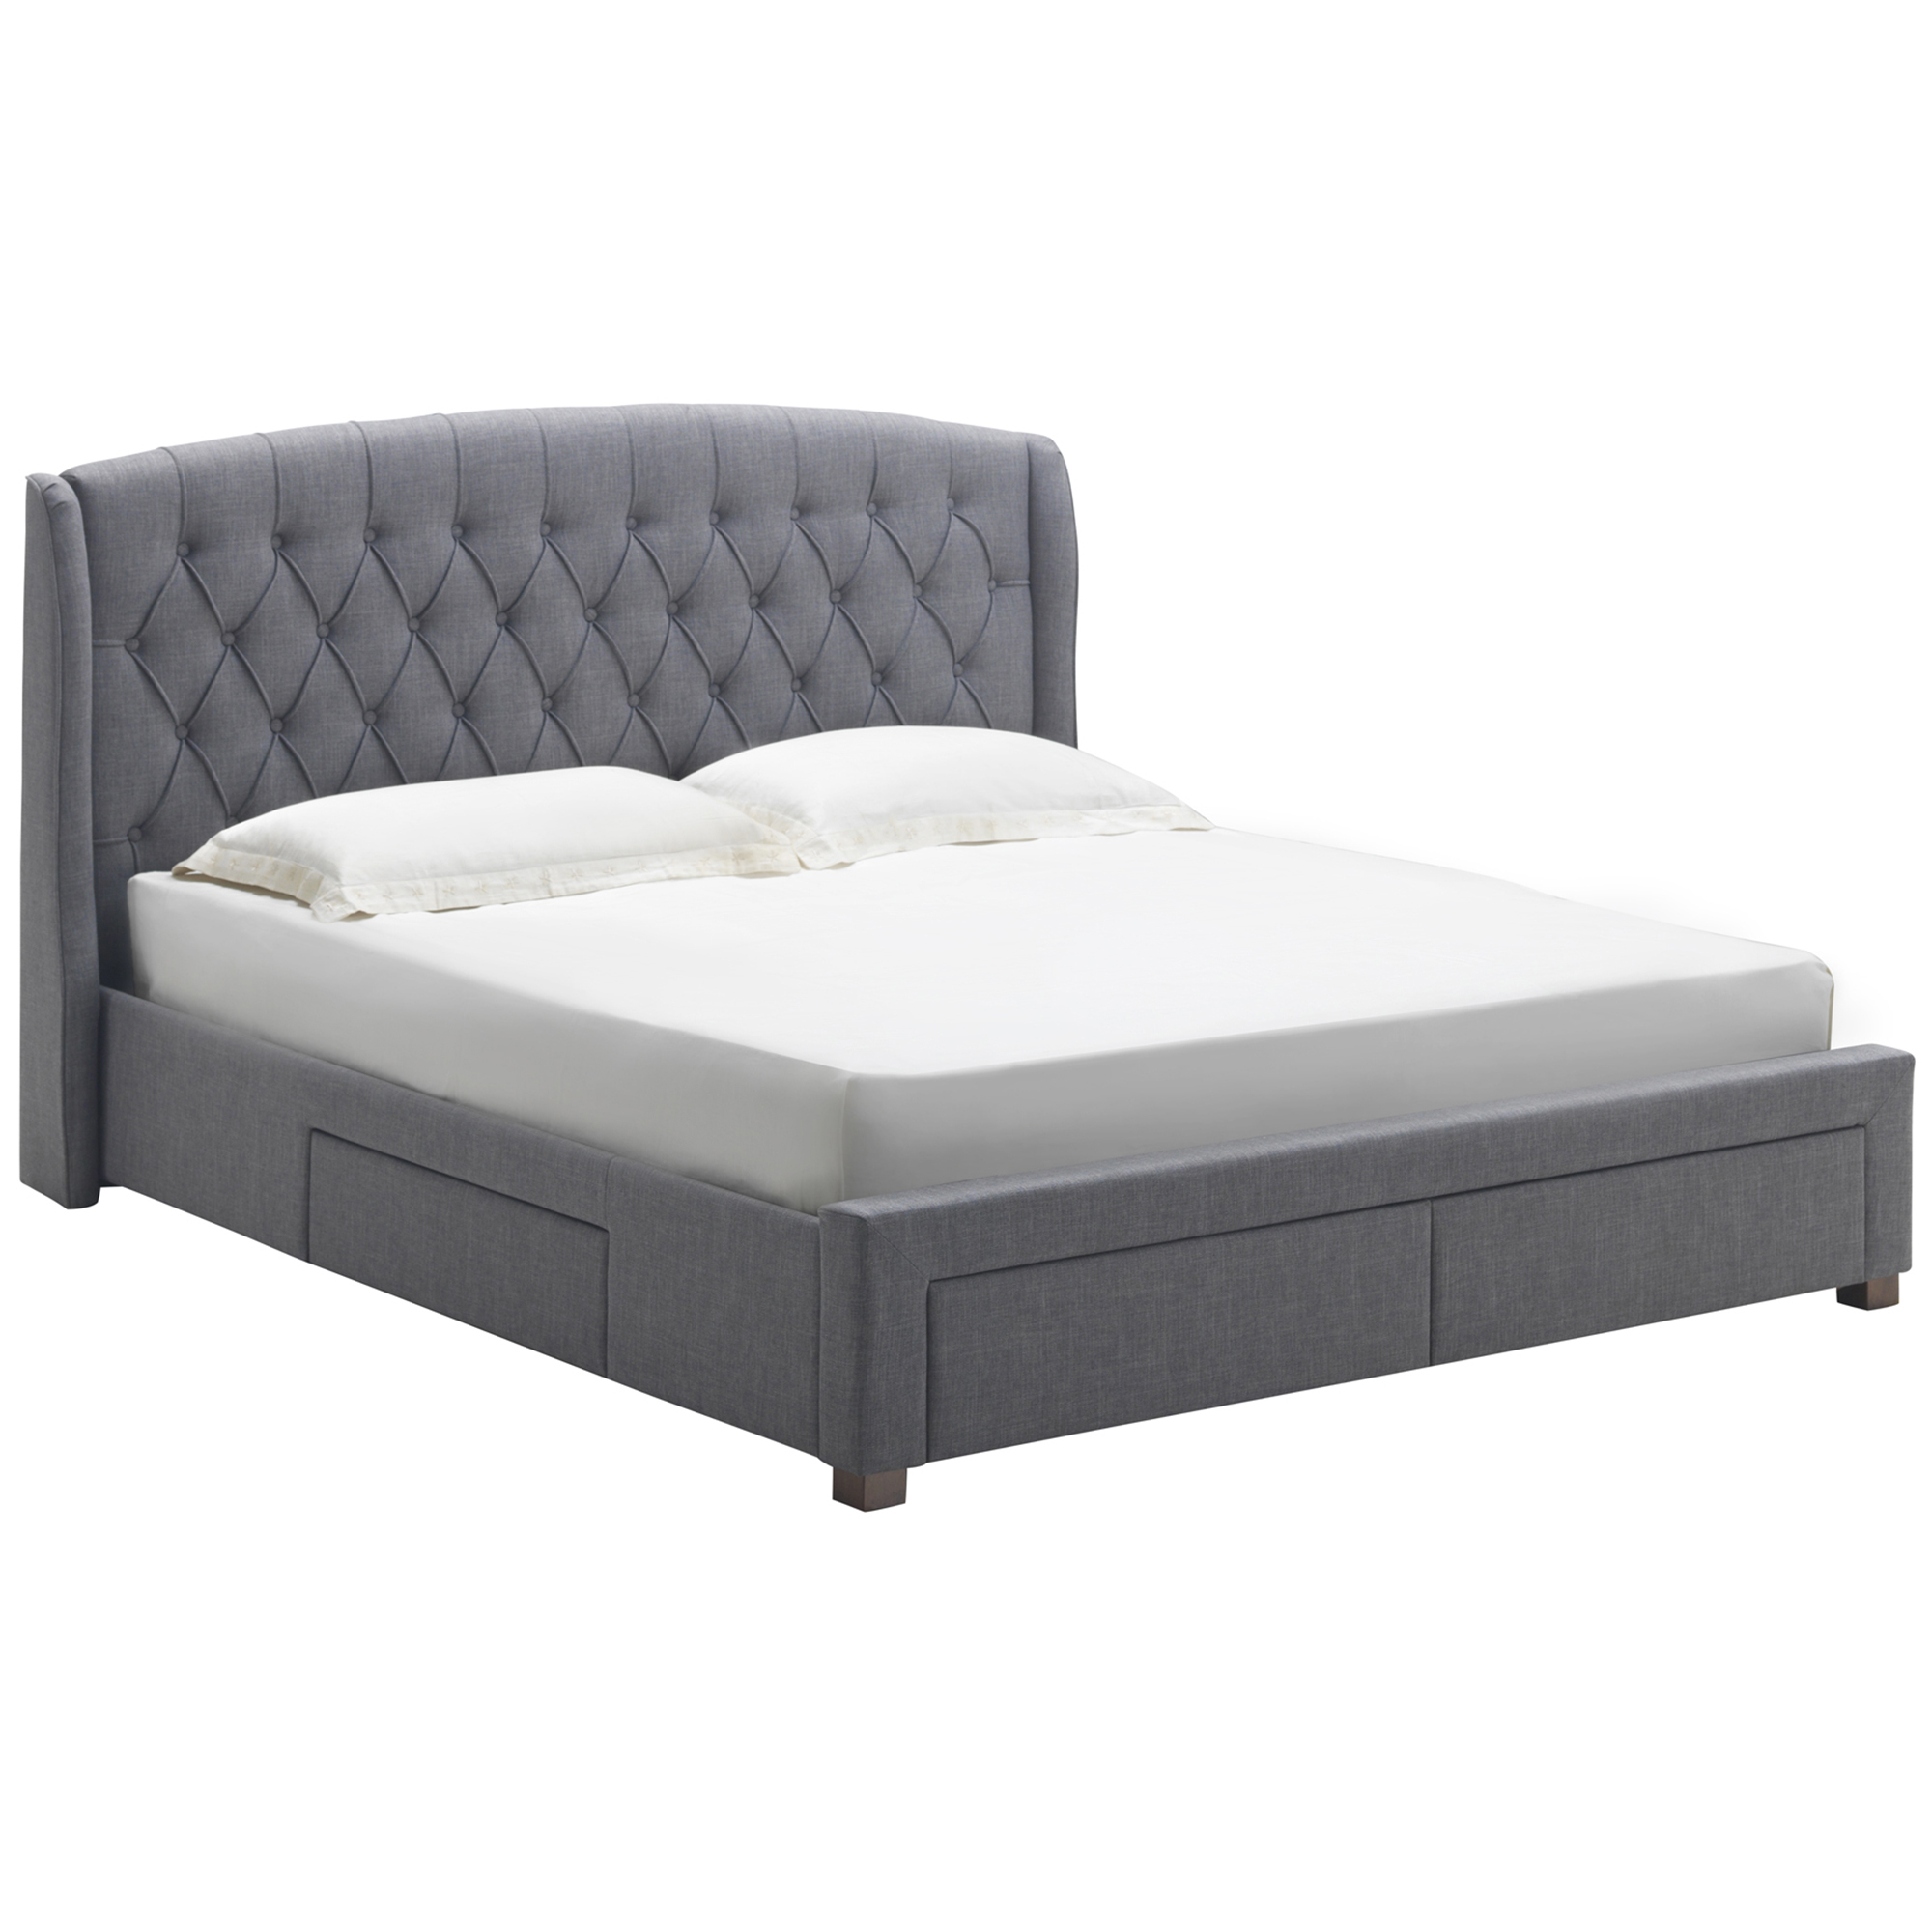 Webster Grey Audrey Tufted Wingback Bed, Audrey Ii Upholstered Wingback King Headboard